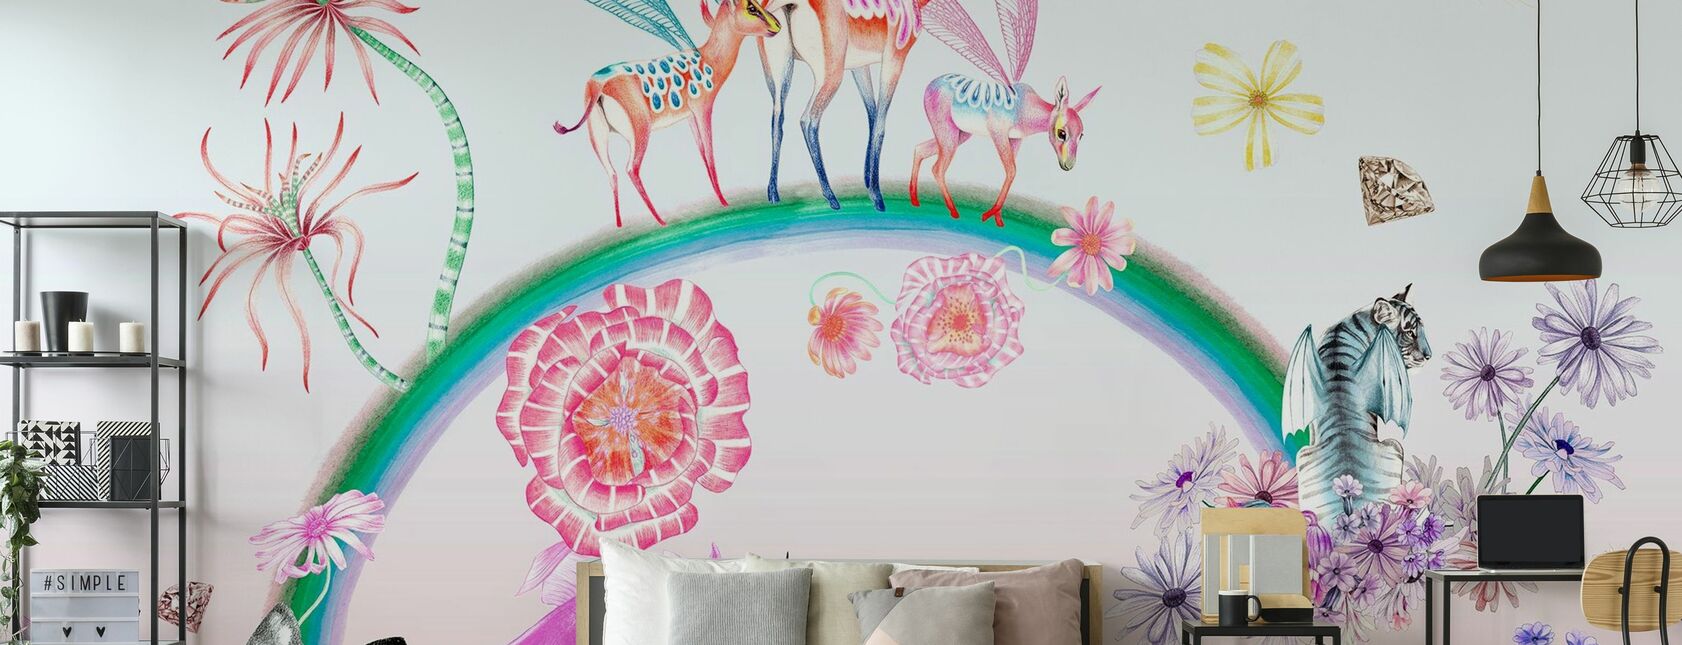 Fables-Ombre - Tapete - teen-room